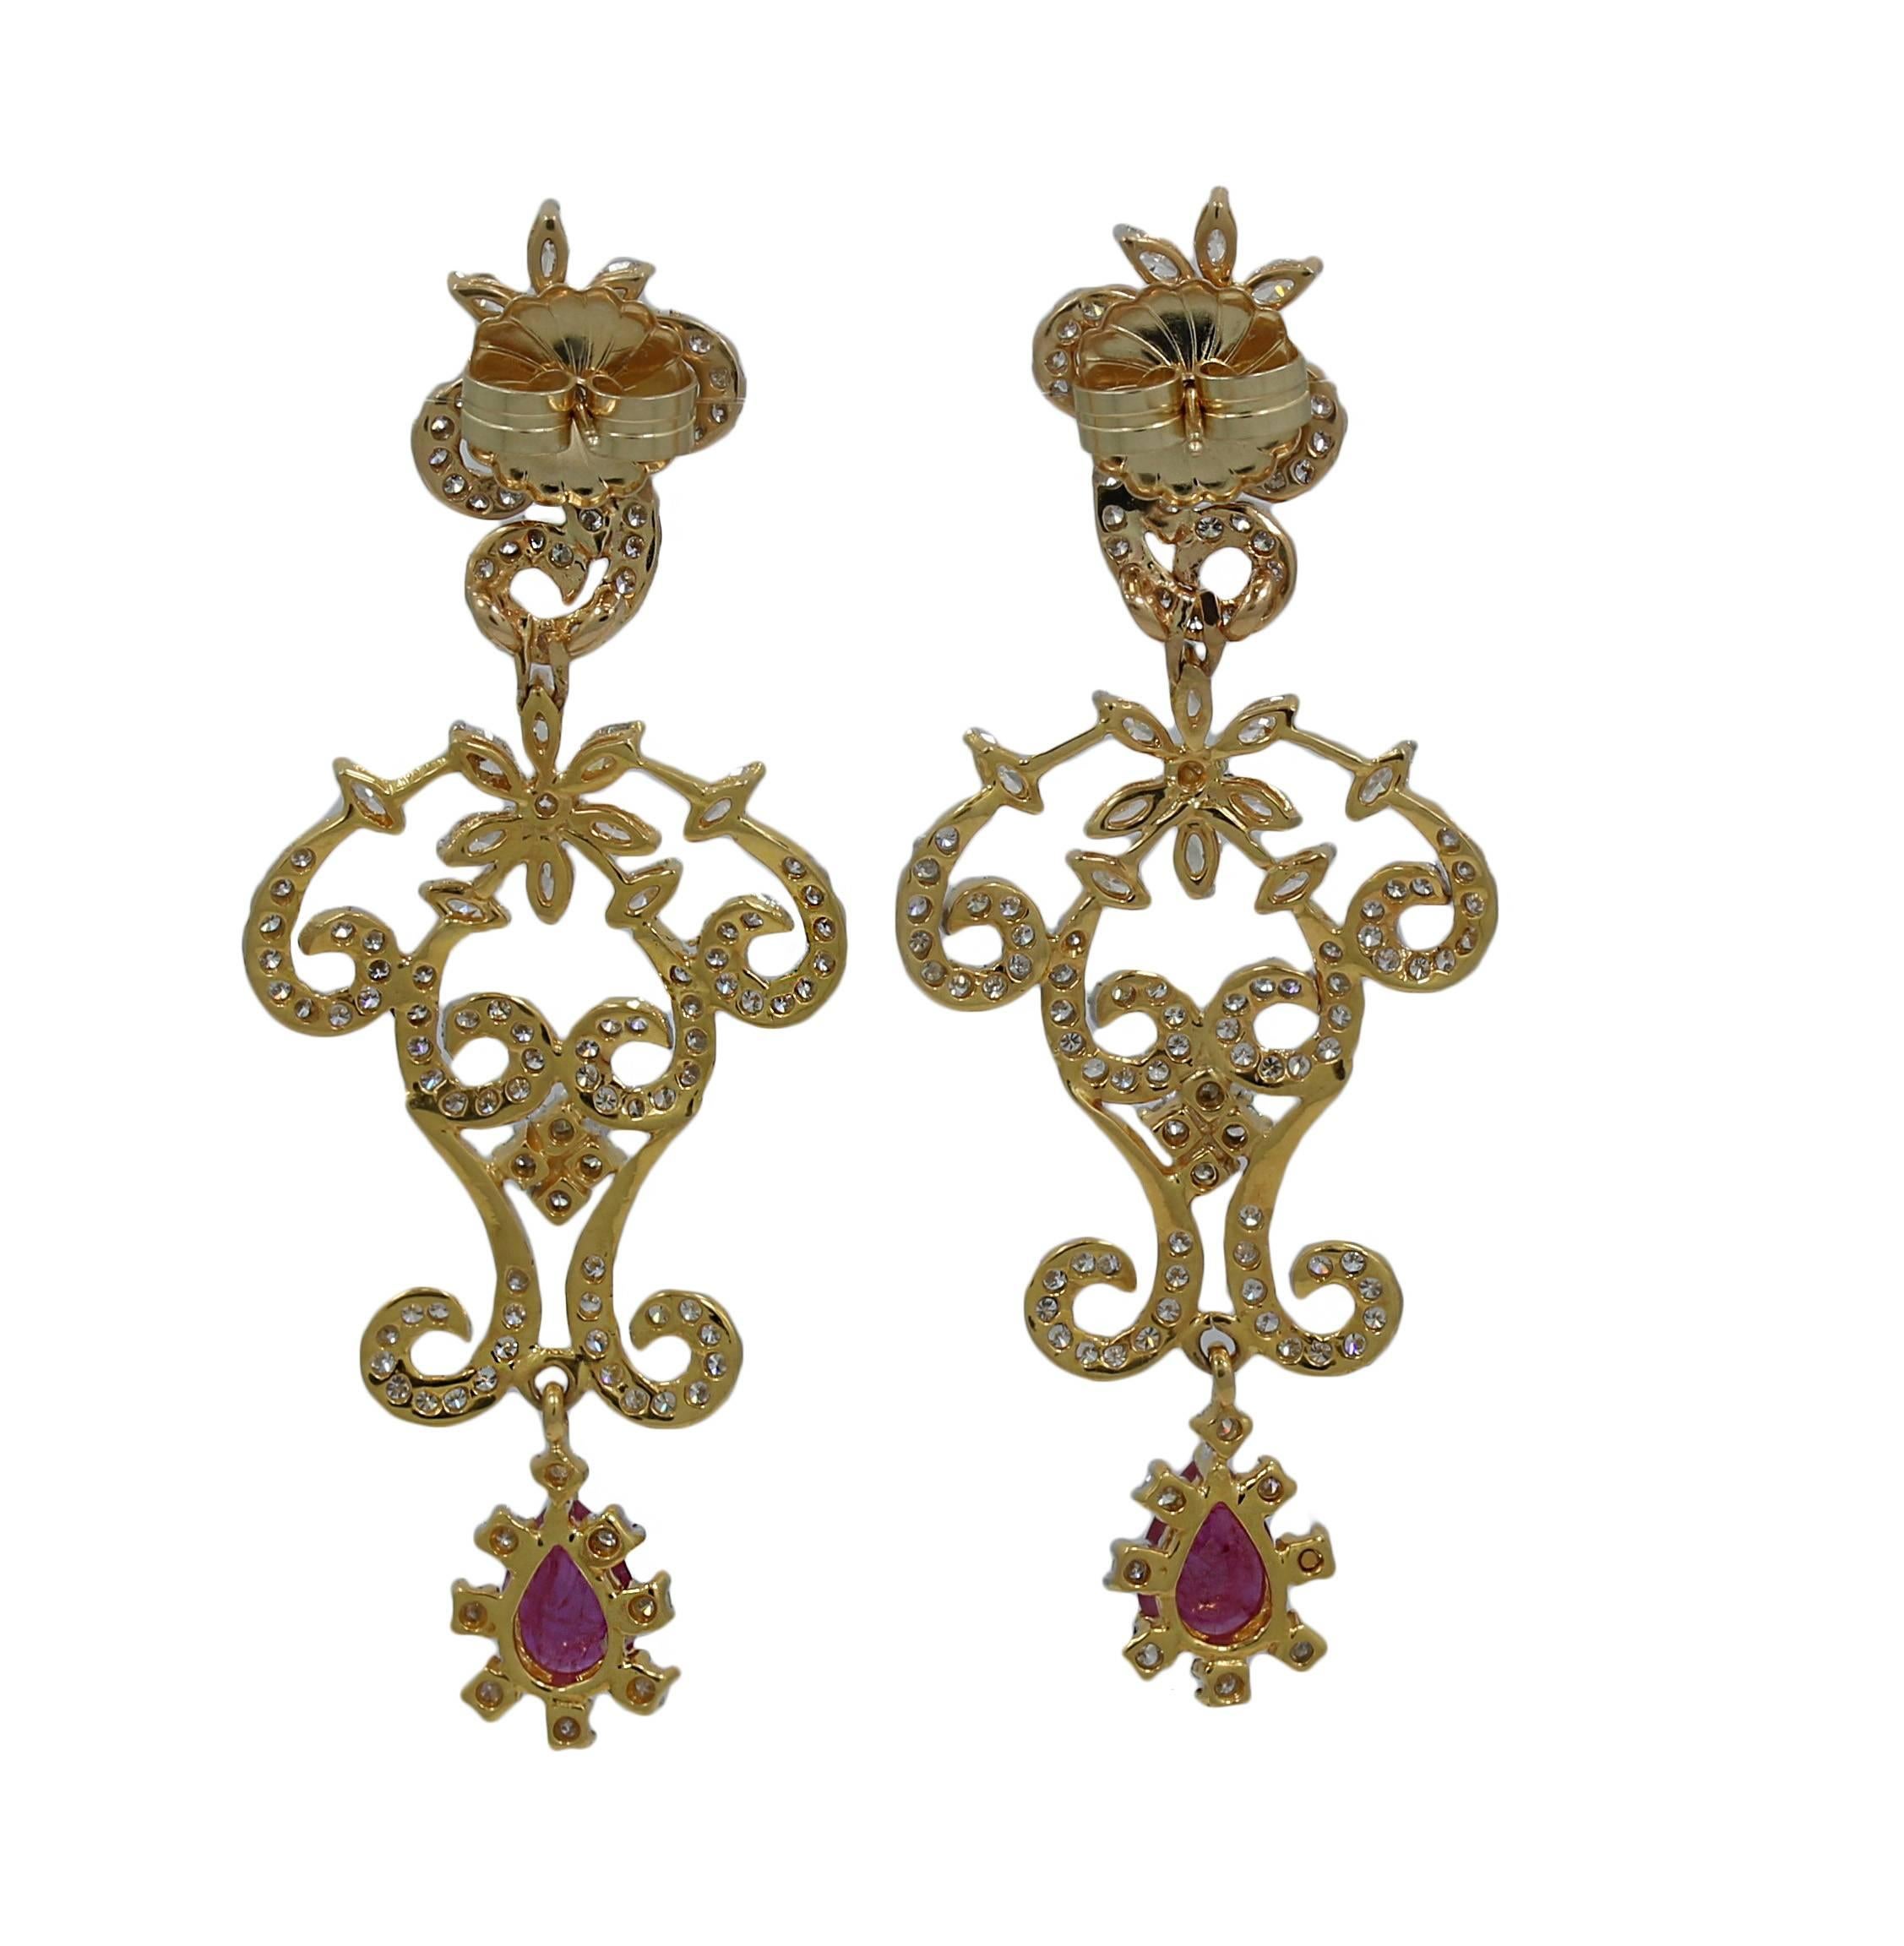 22K Yellow Gold Earrings with rubies and diamonds. Approximately 1.10 of rubies and the diamonds are approximately 2.40 carats total weight. The earrings measure 2.5 inches in length and weigh a total of 14.5 grams. The backs are 14k. 